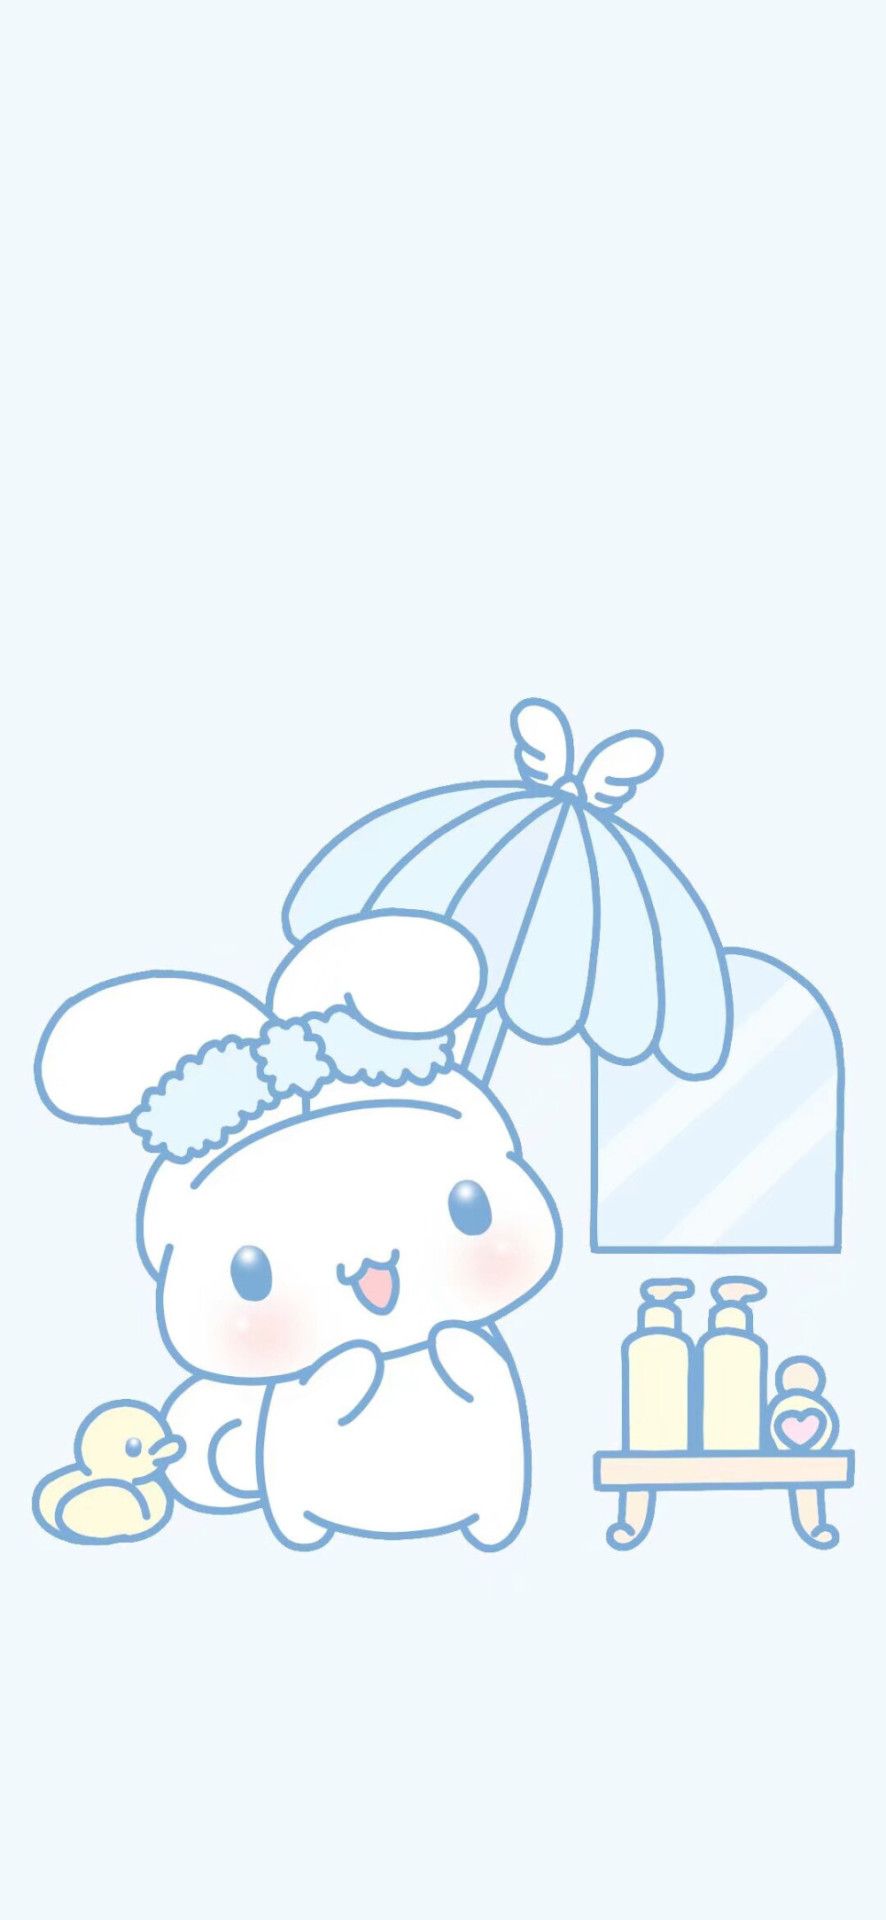 A cute cartoon rabbit with an umbrella and some bottles - Cinnamoroll